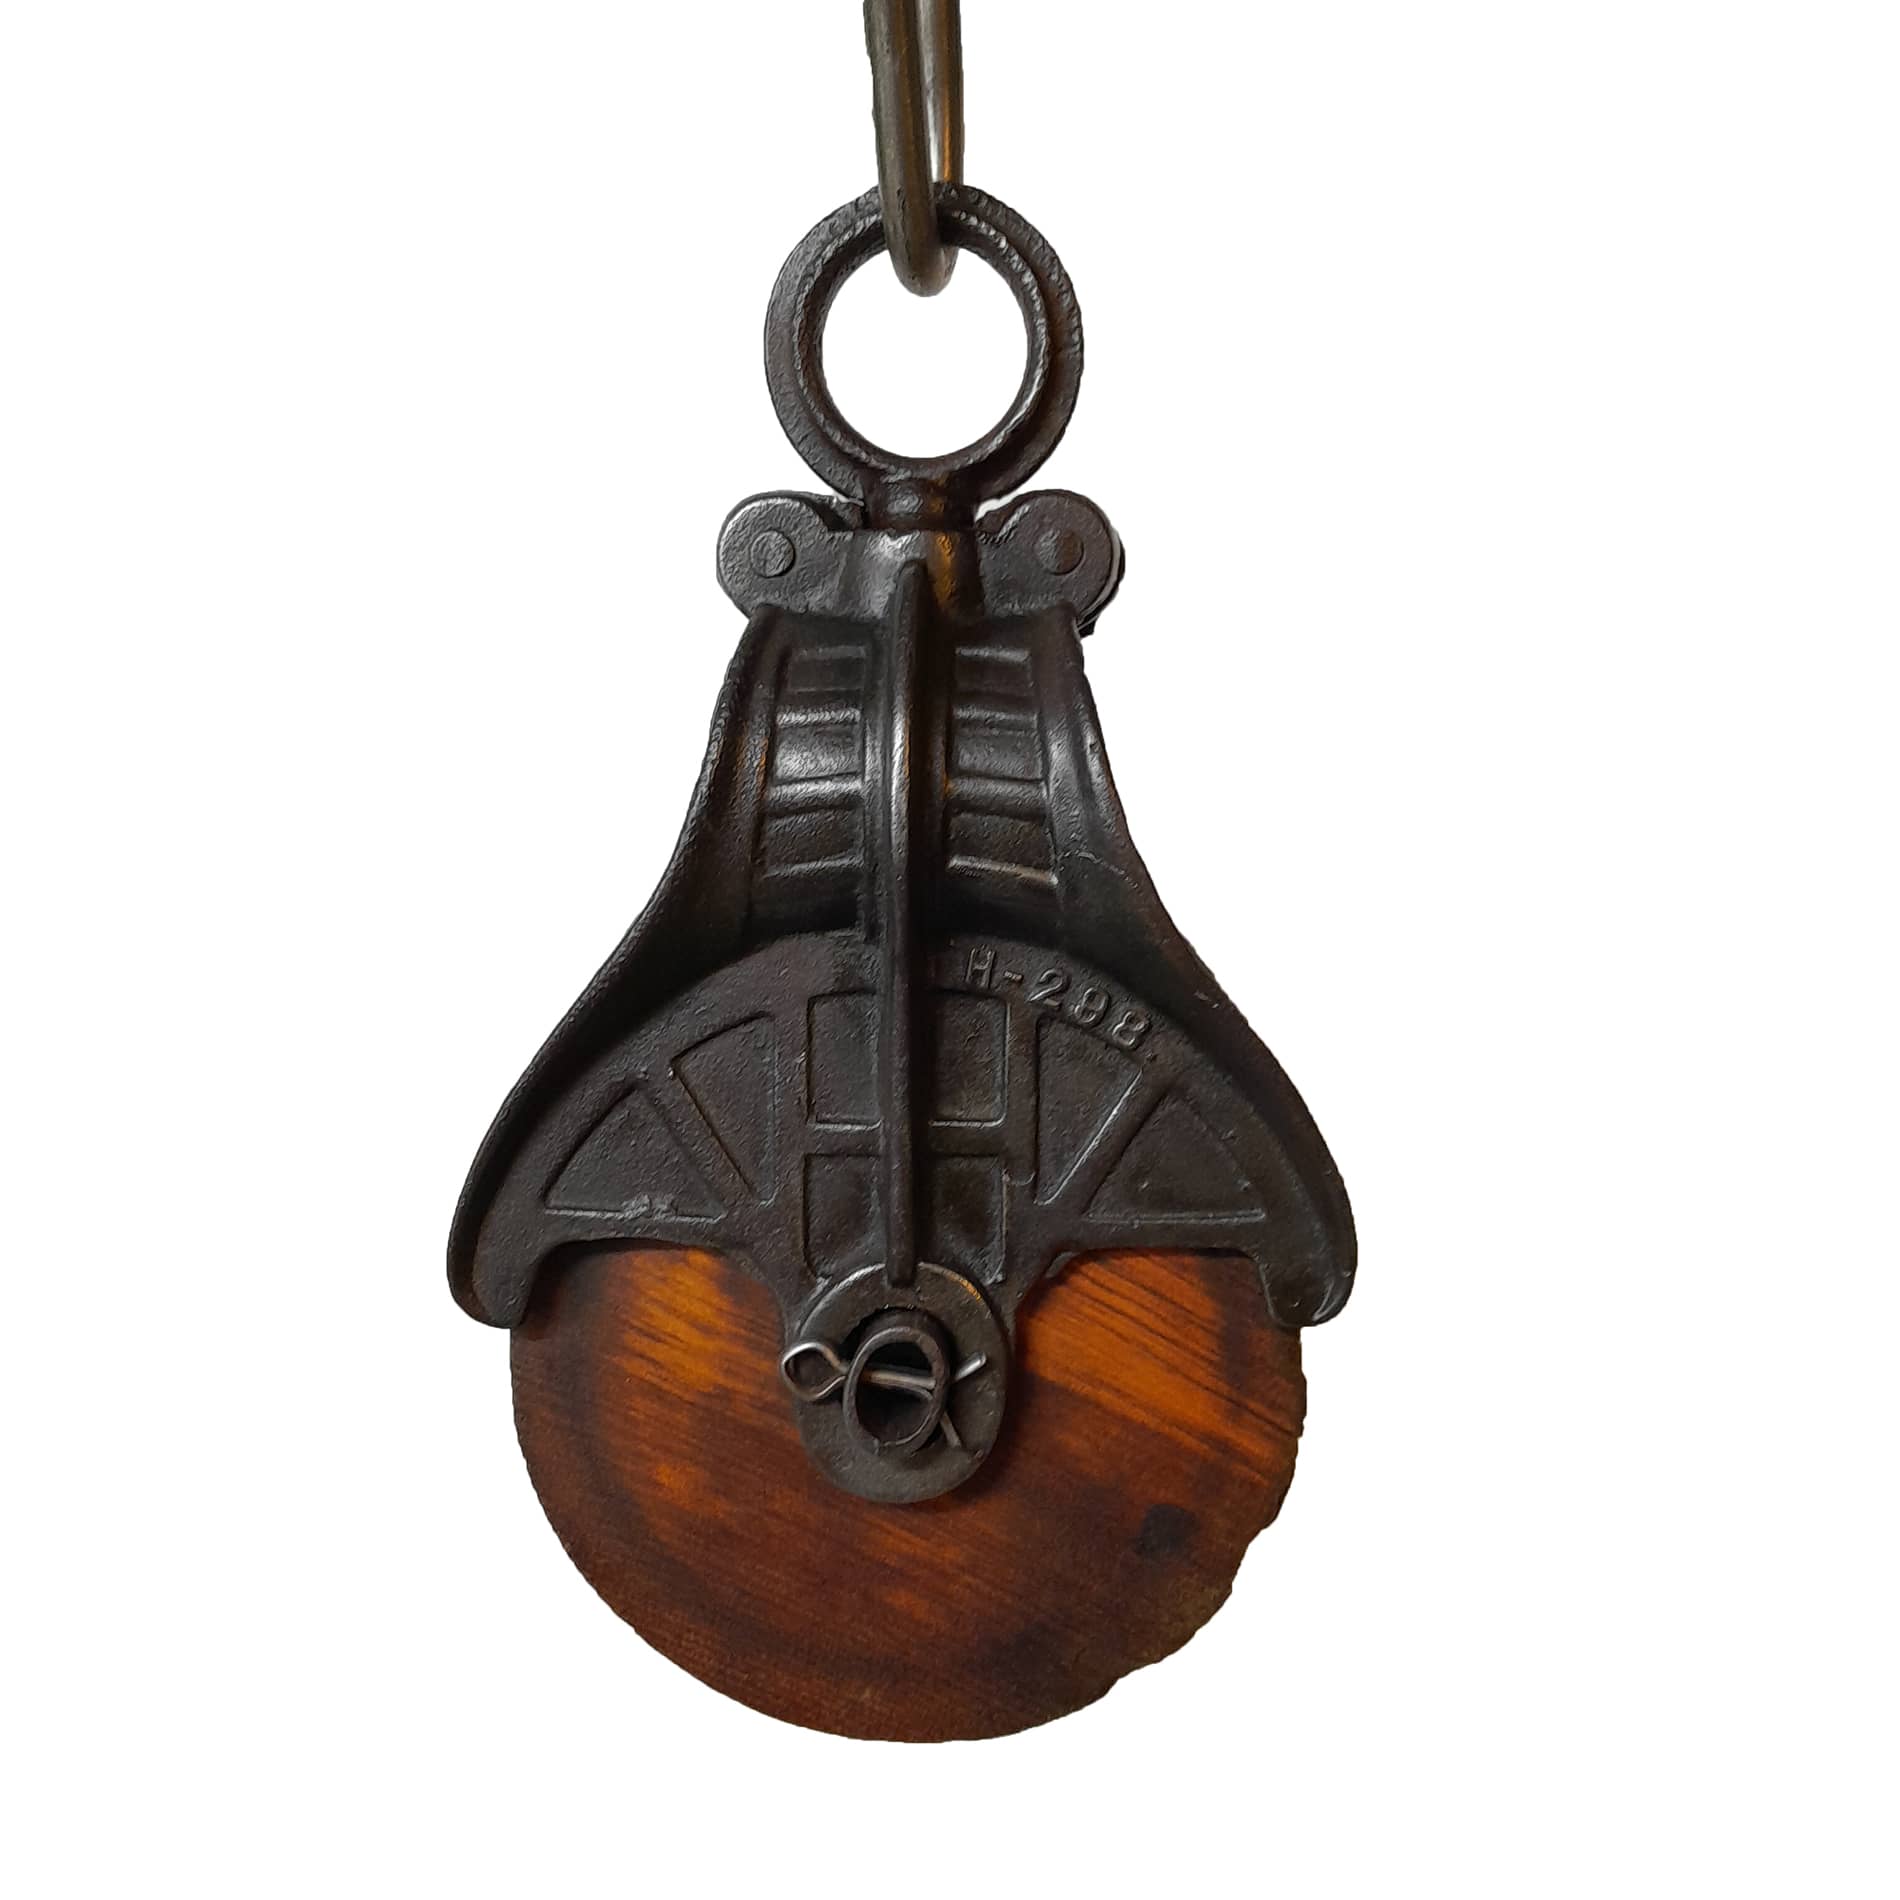 Wooden Decorative Pulley With Hook - Silver